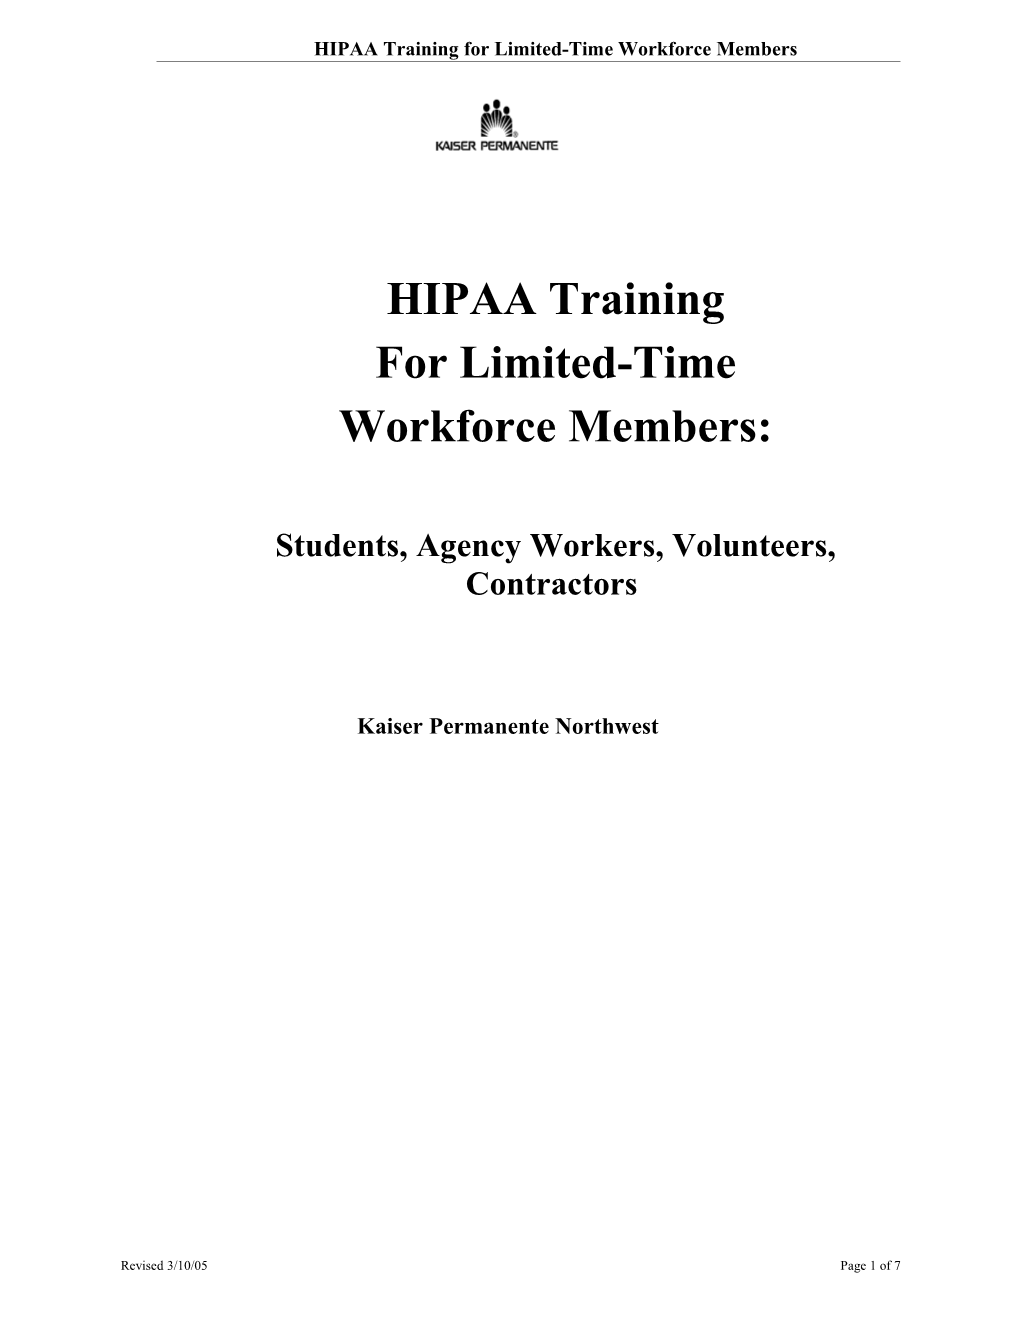 HIPAA Training for Limited-Time Workforce Members